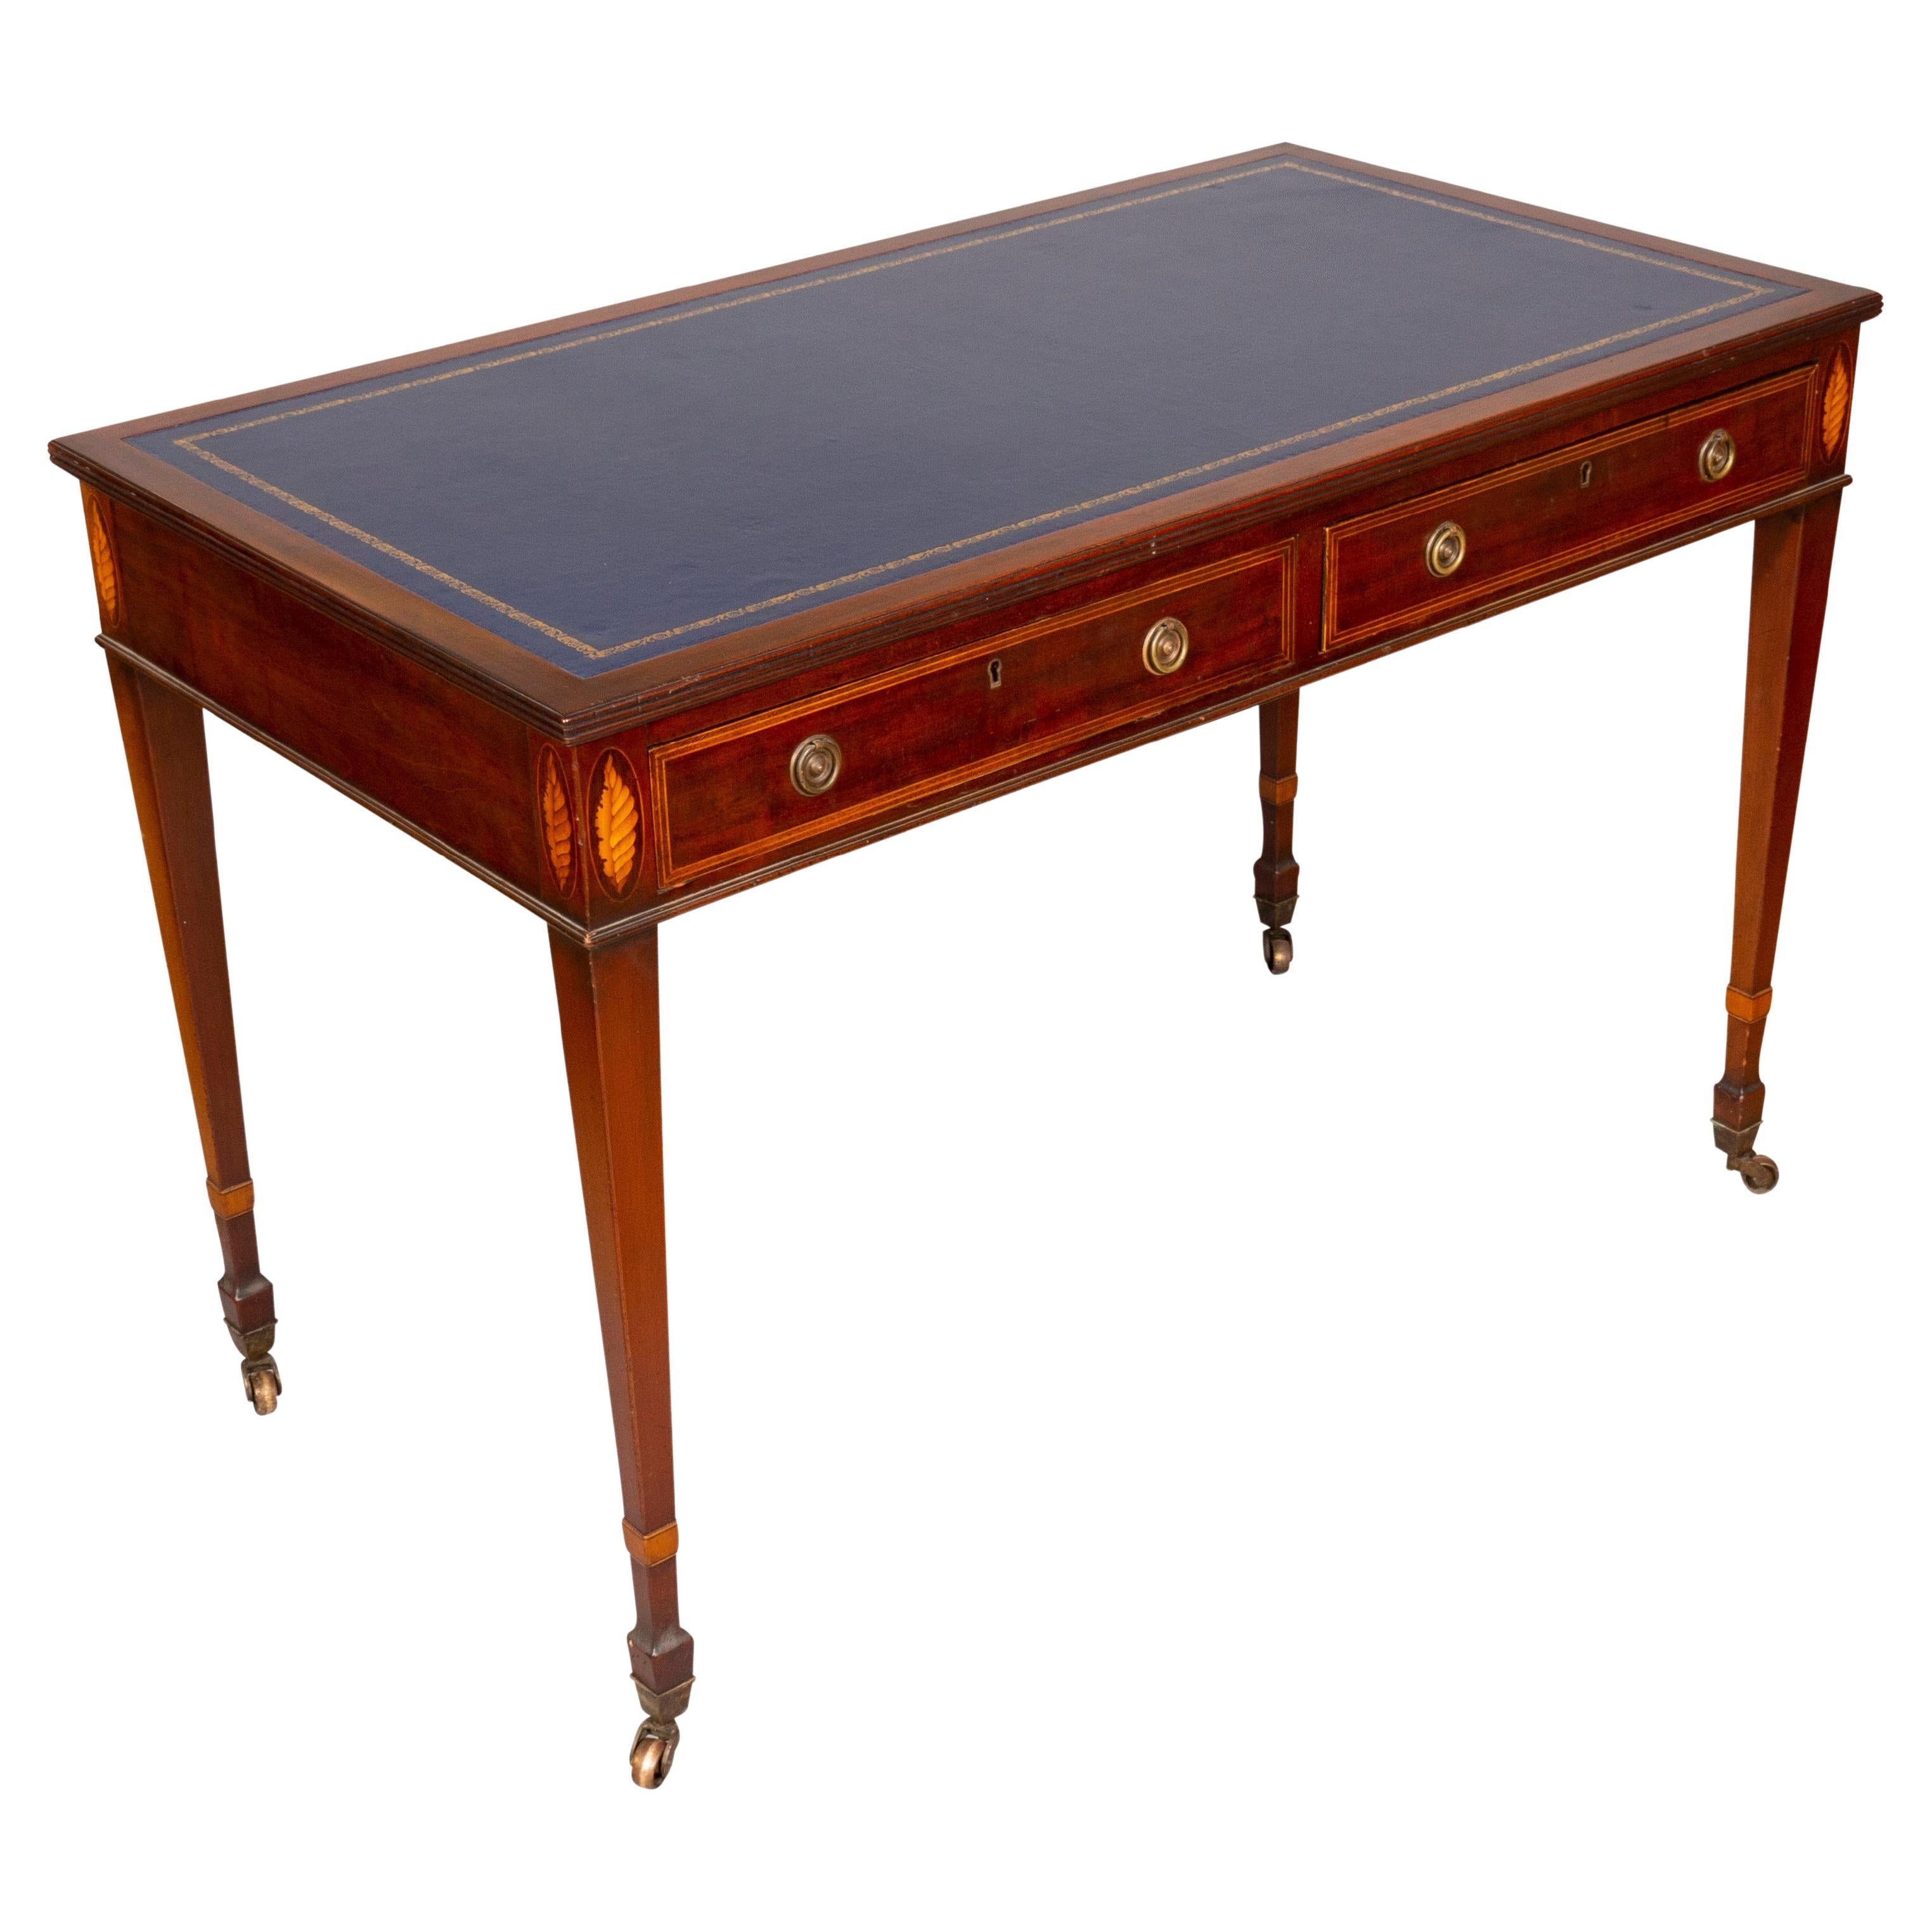 With new tooled blue leather top set in a wood surround over two frieze drawers with shell inlays flanking, raised on square tapered legs and casters.